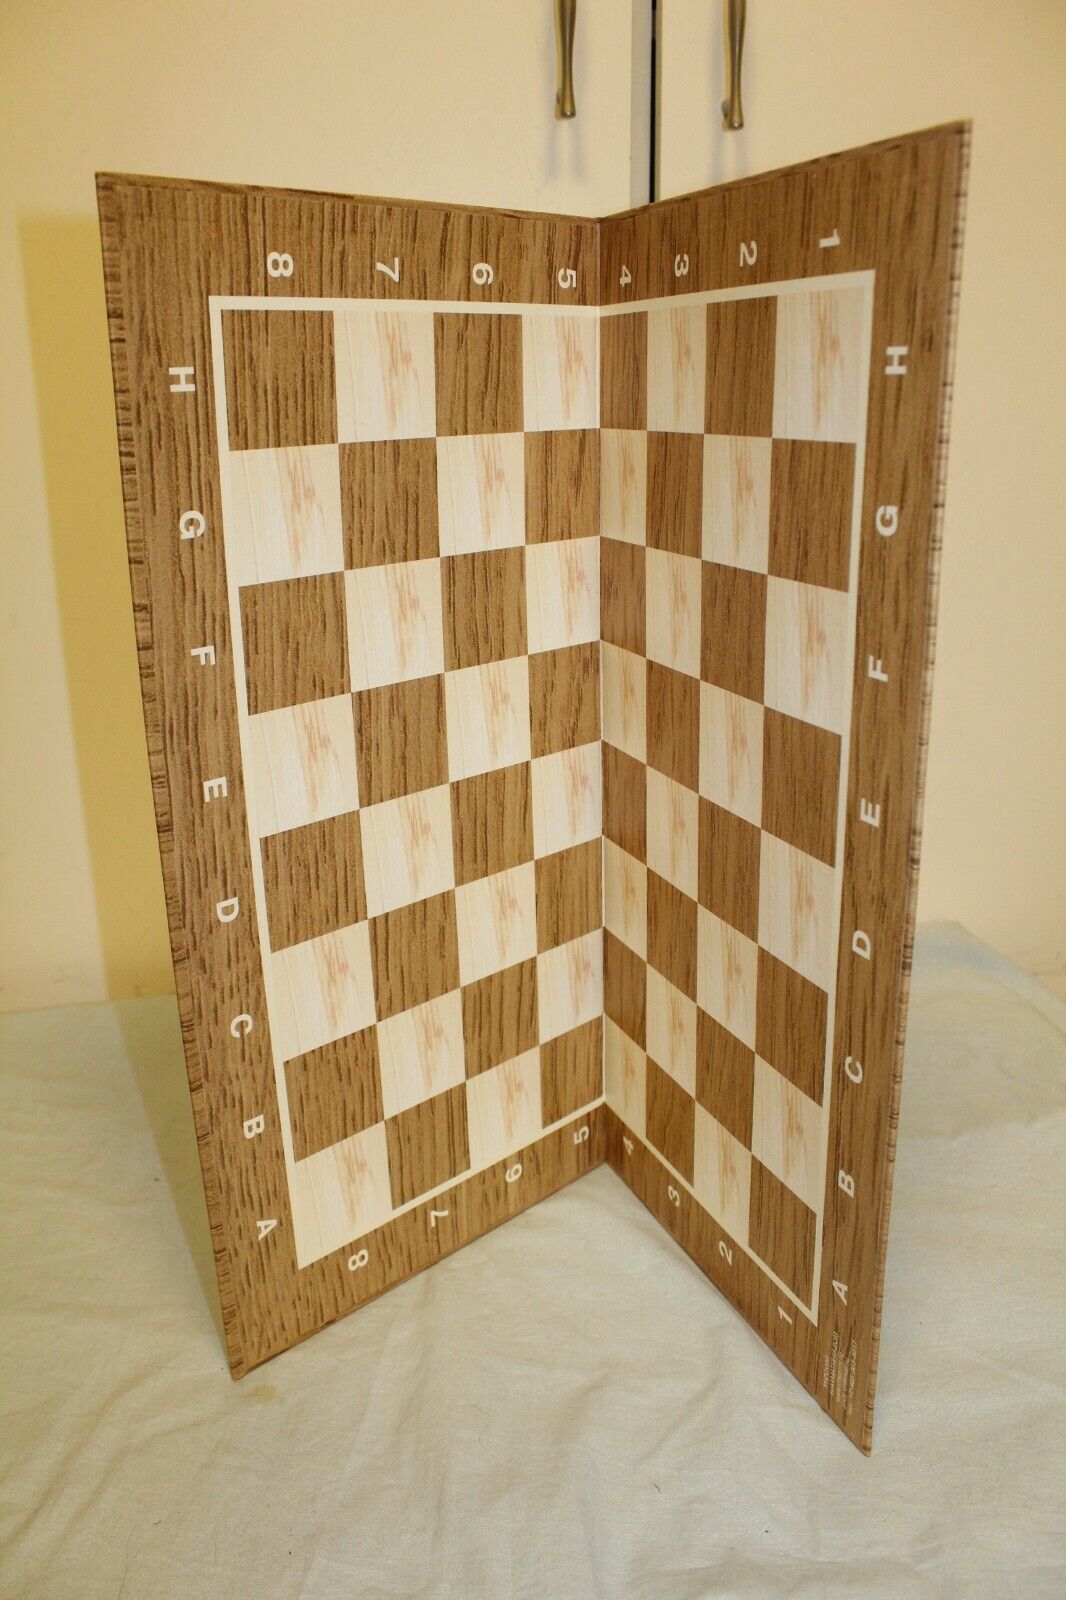 11229.Chess Tournament Cardboard Board with International Blitz Game Rules (47x47 cm)